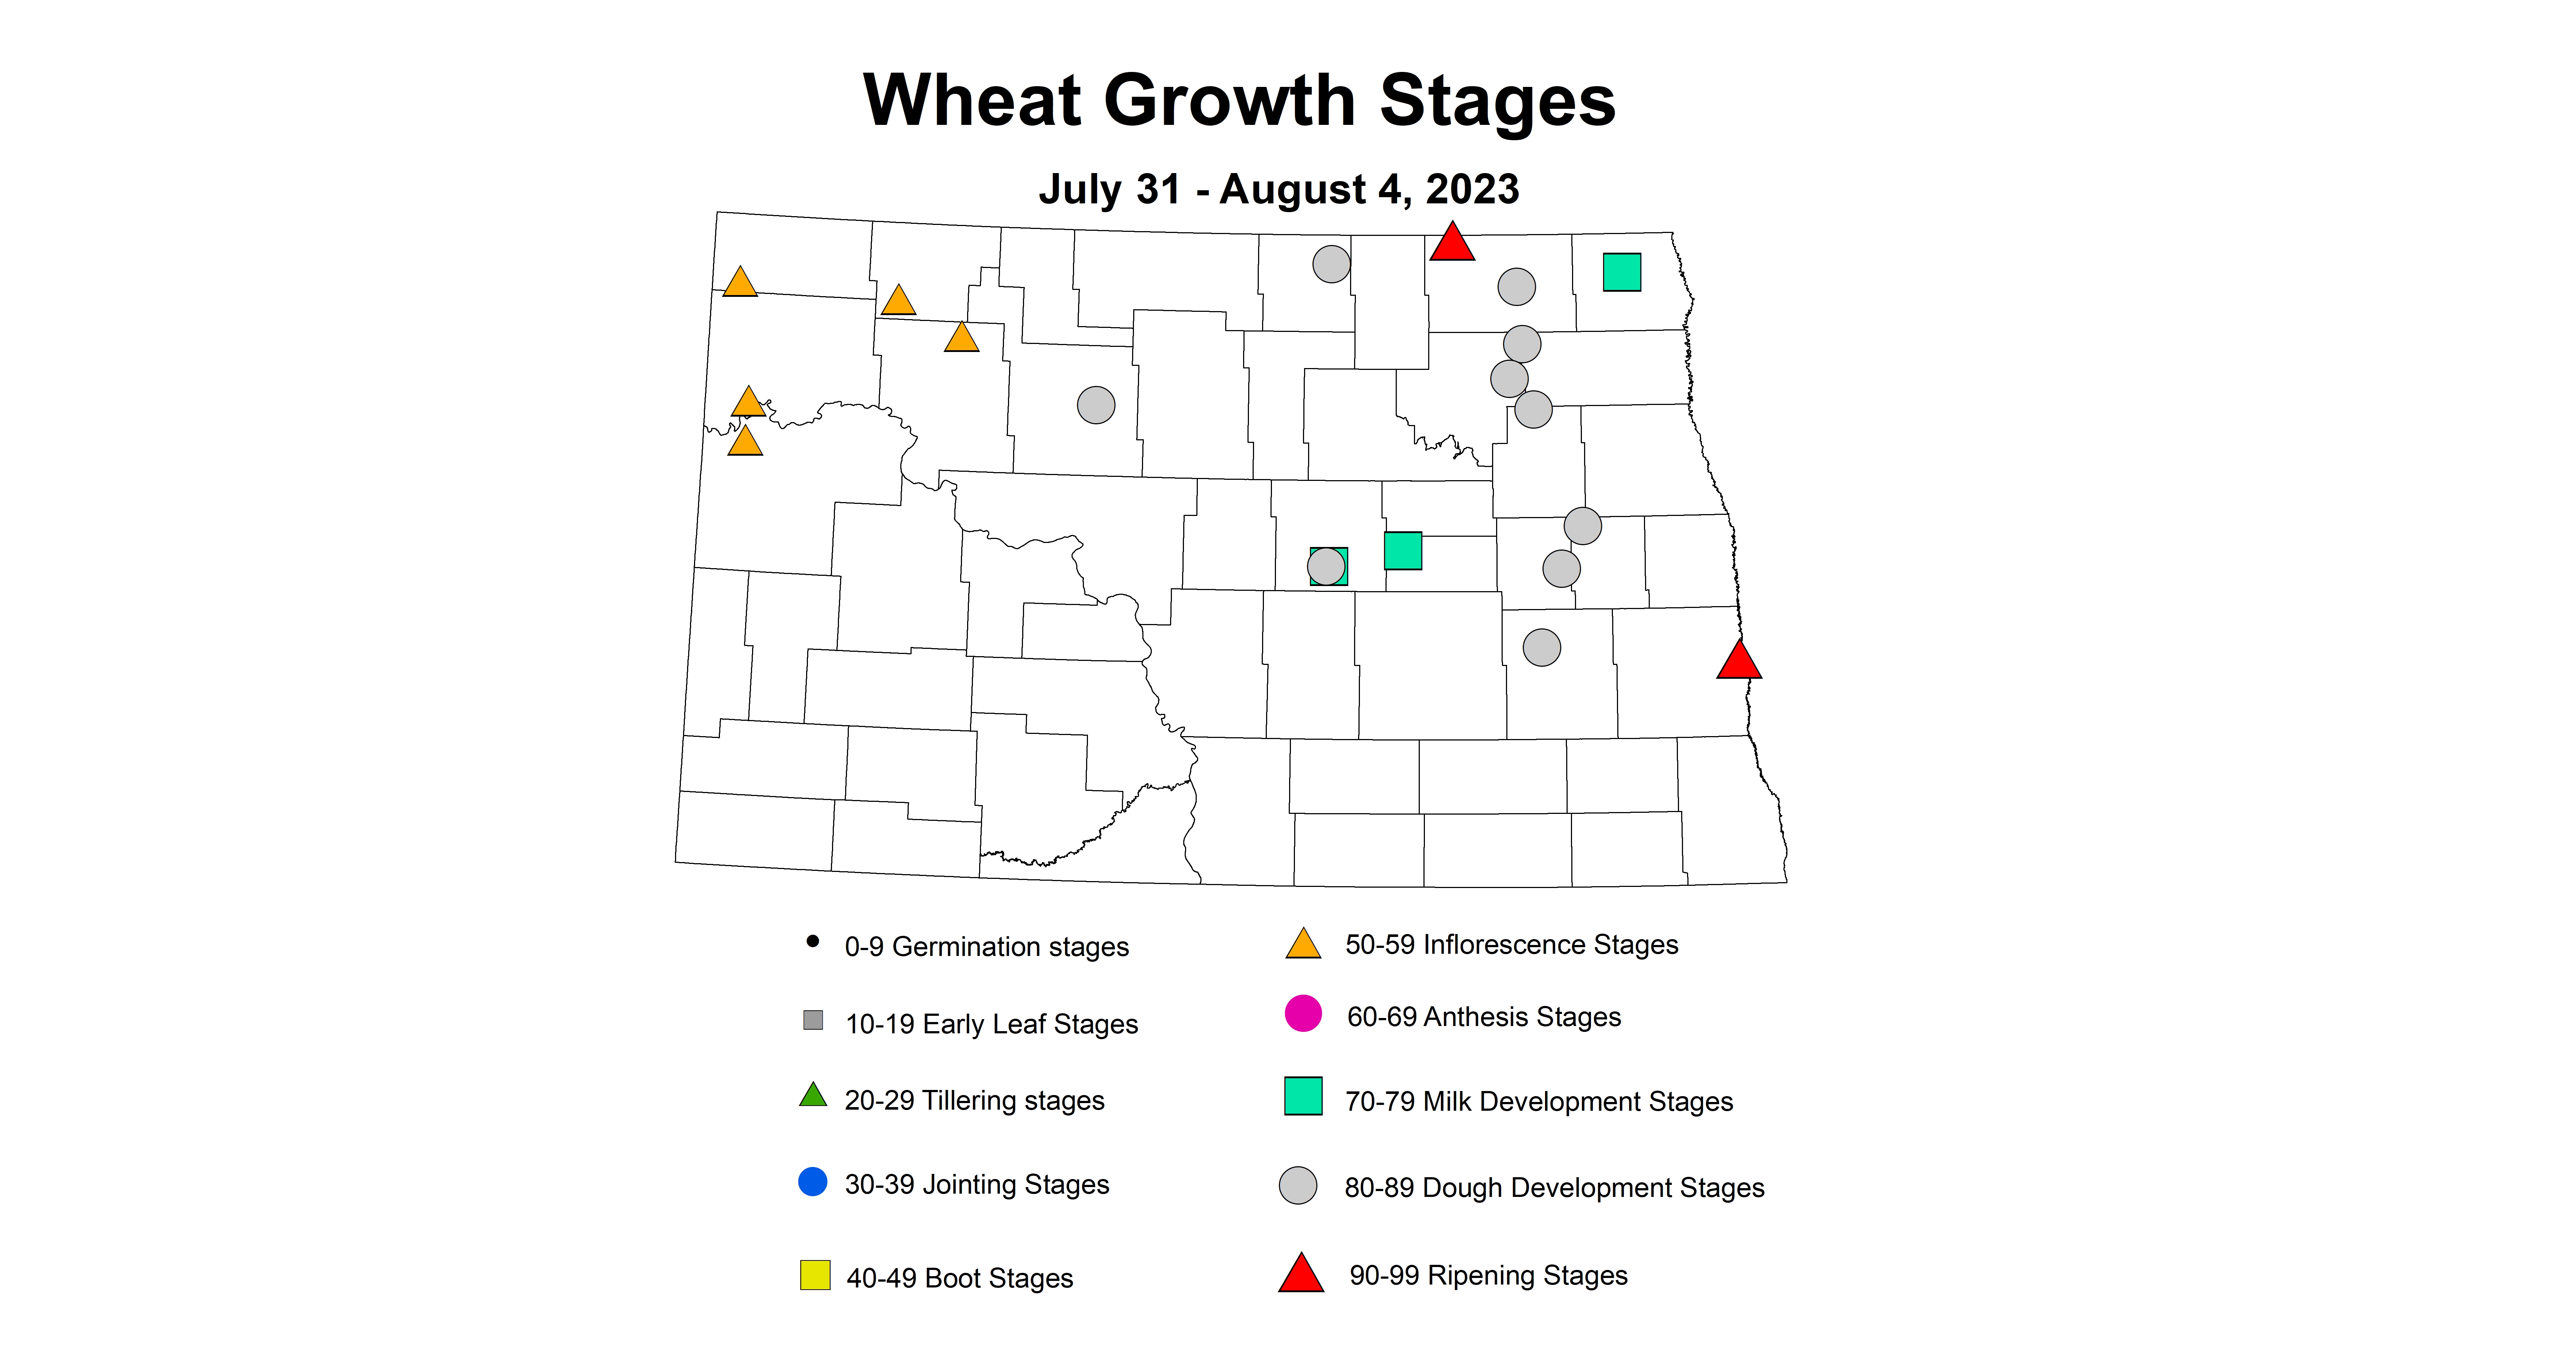 wheat insecttrap wheat growth stages 7.31-8.4 2023